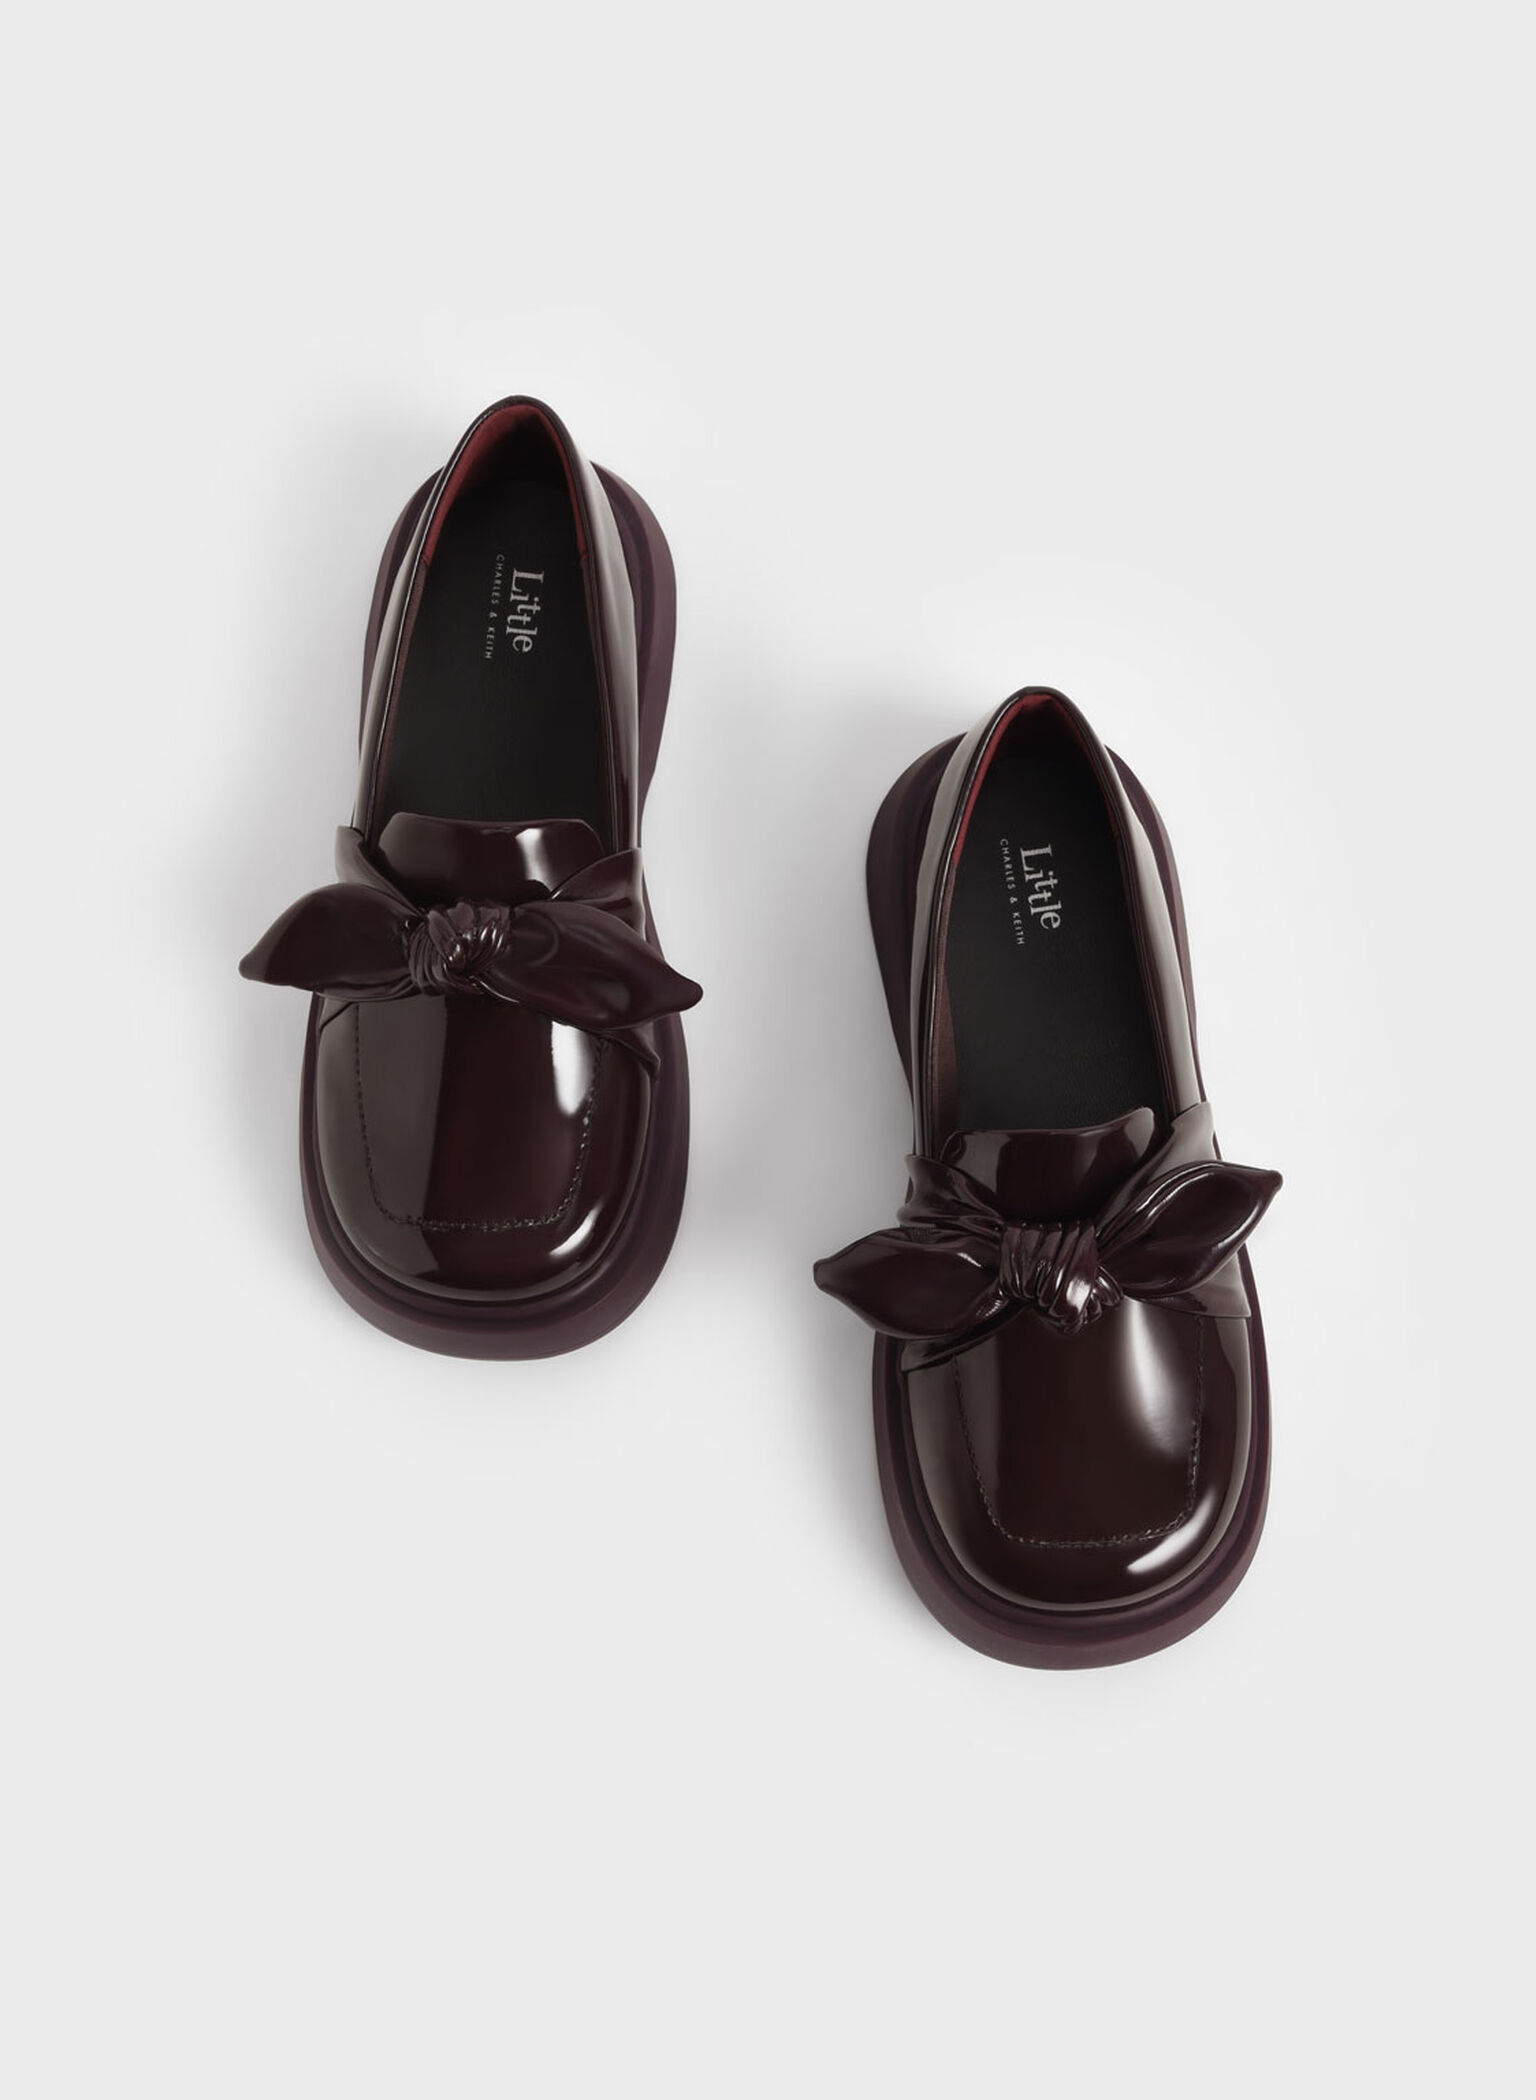 Girls' Patent Bow Loafers, Maroon, hi-res